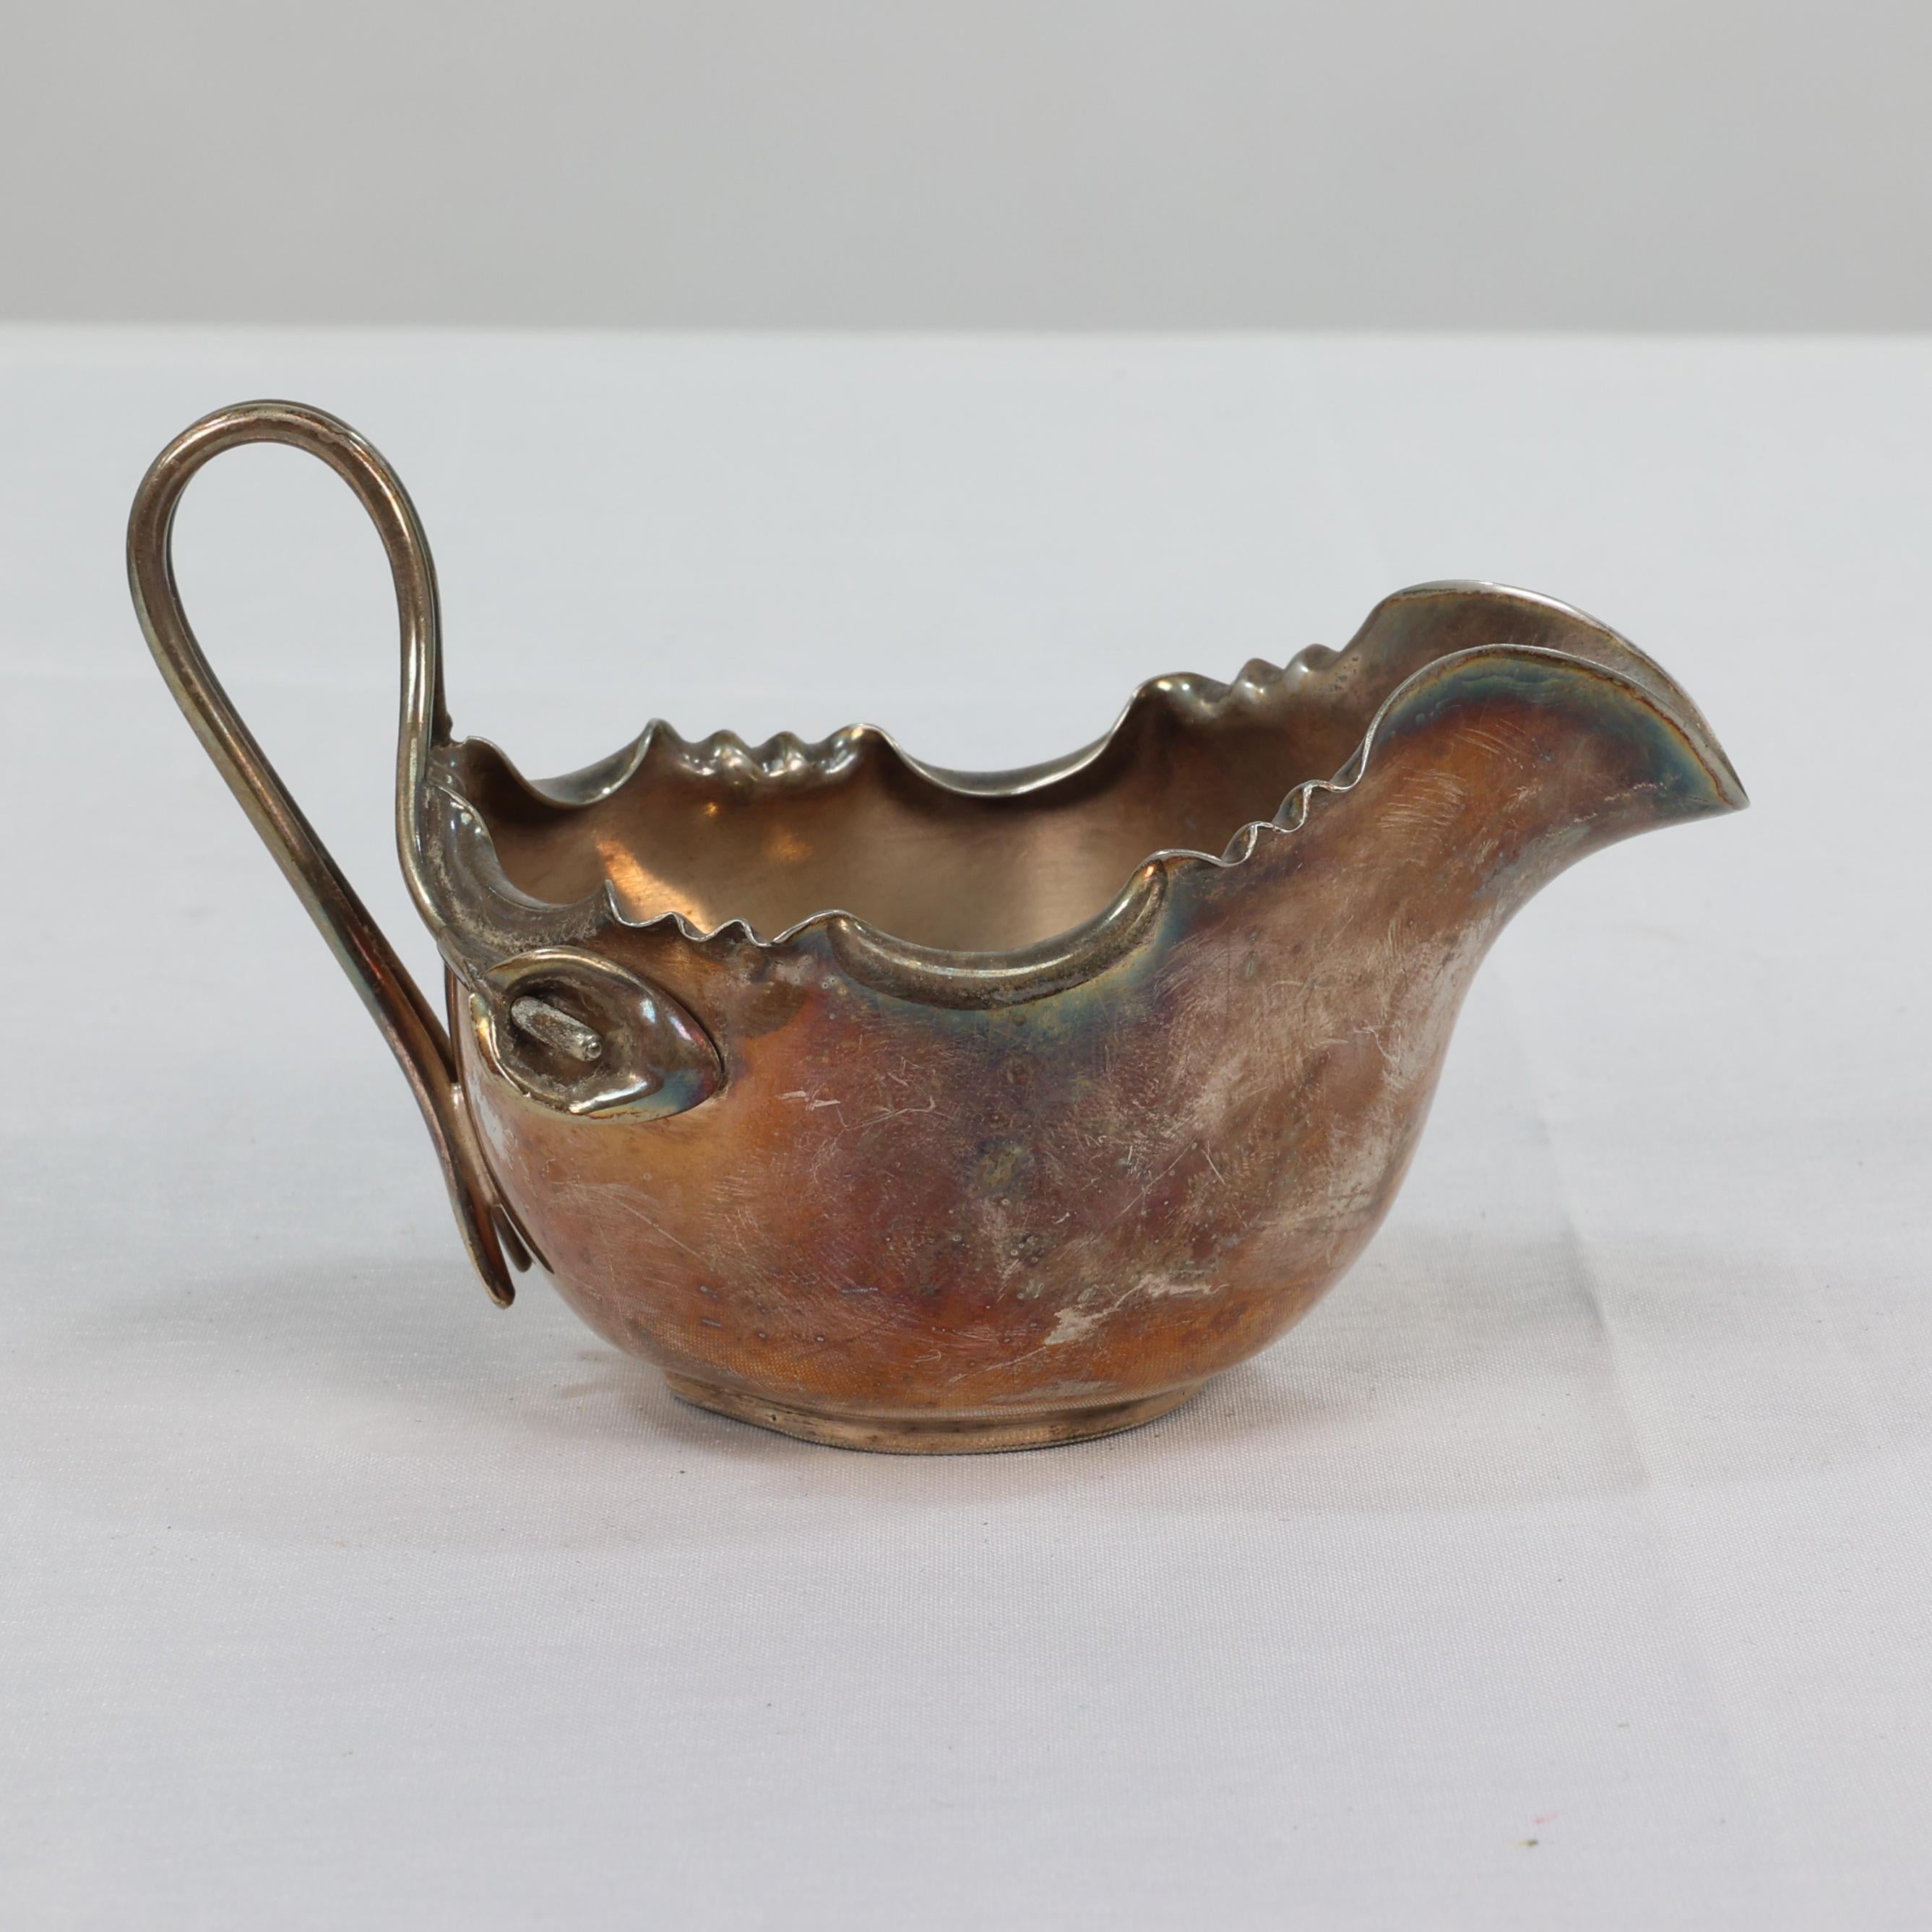 James Dixon, Dr C Dresser style of. An Aesthetic Movement silver-plated sugar bowl and milk jug, the jug with a trumpet style flower to the handle. H 5 x W 11 x D 11. 